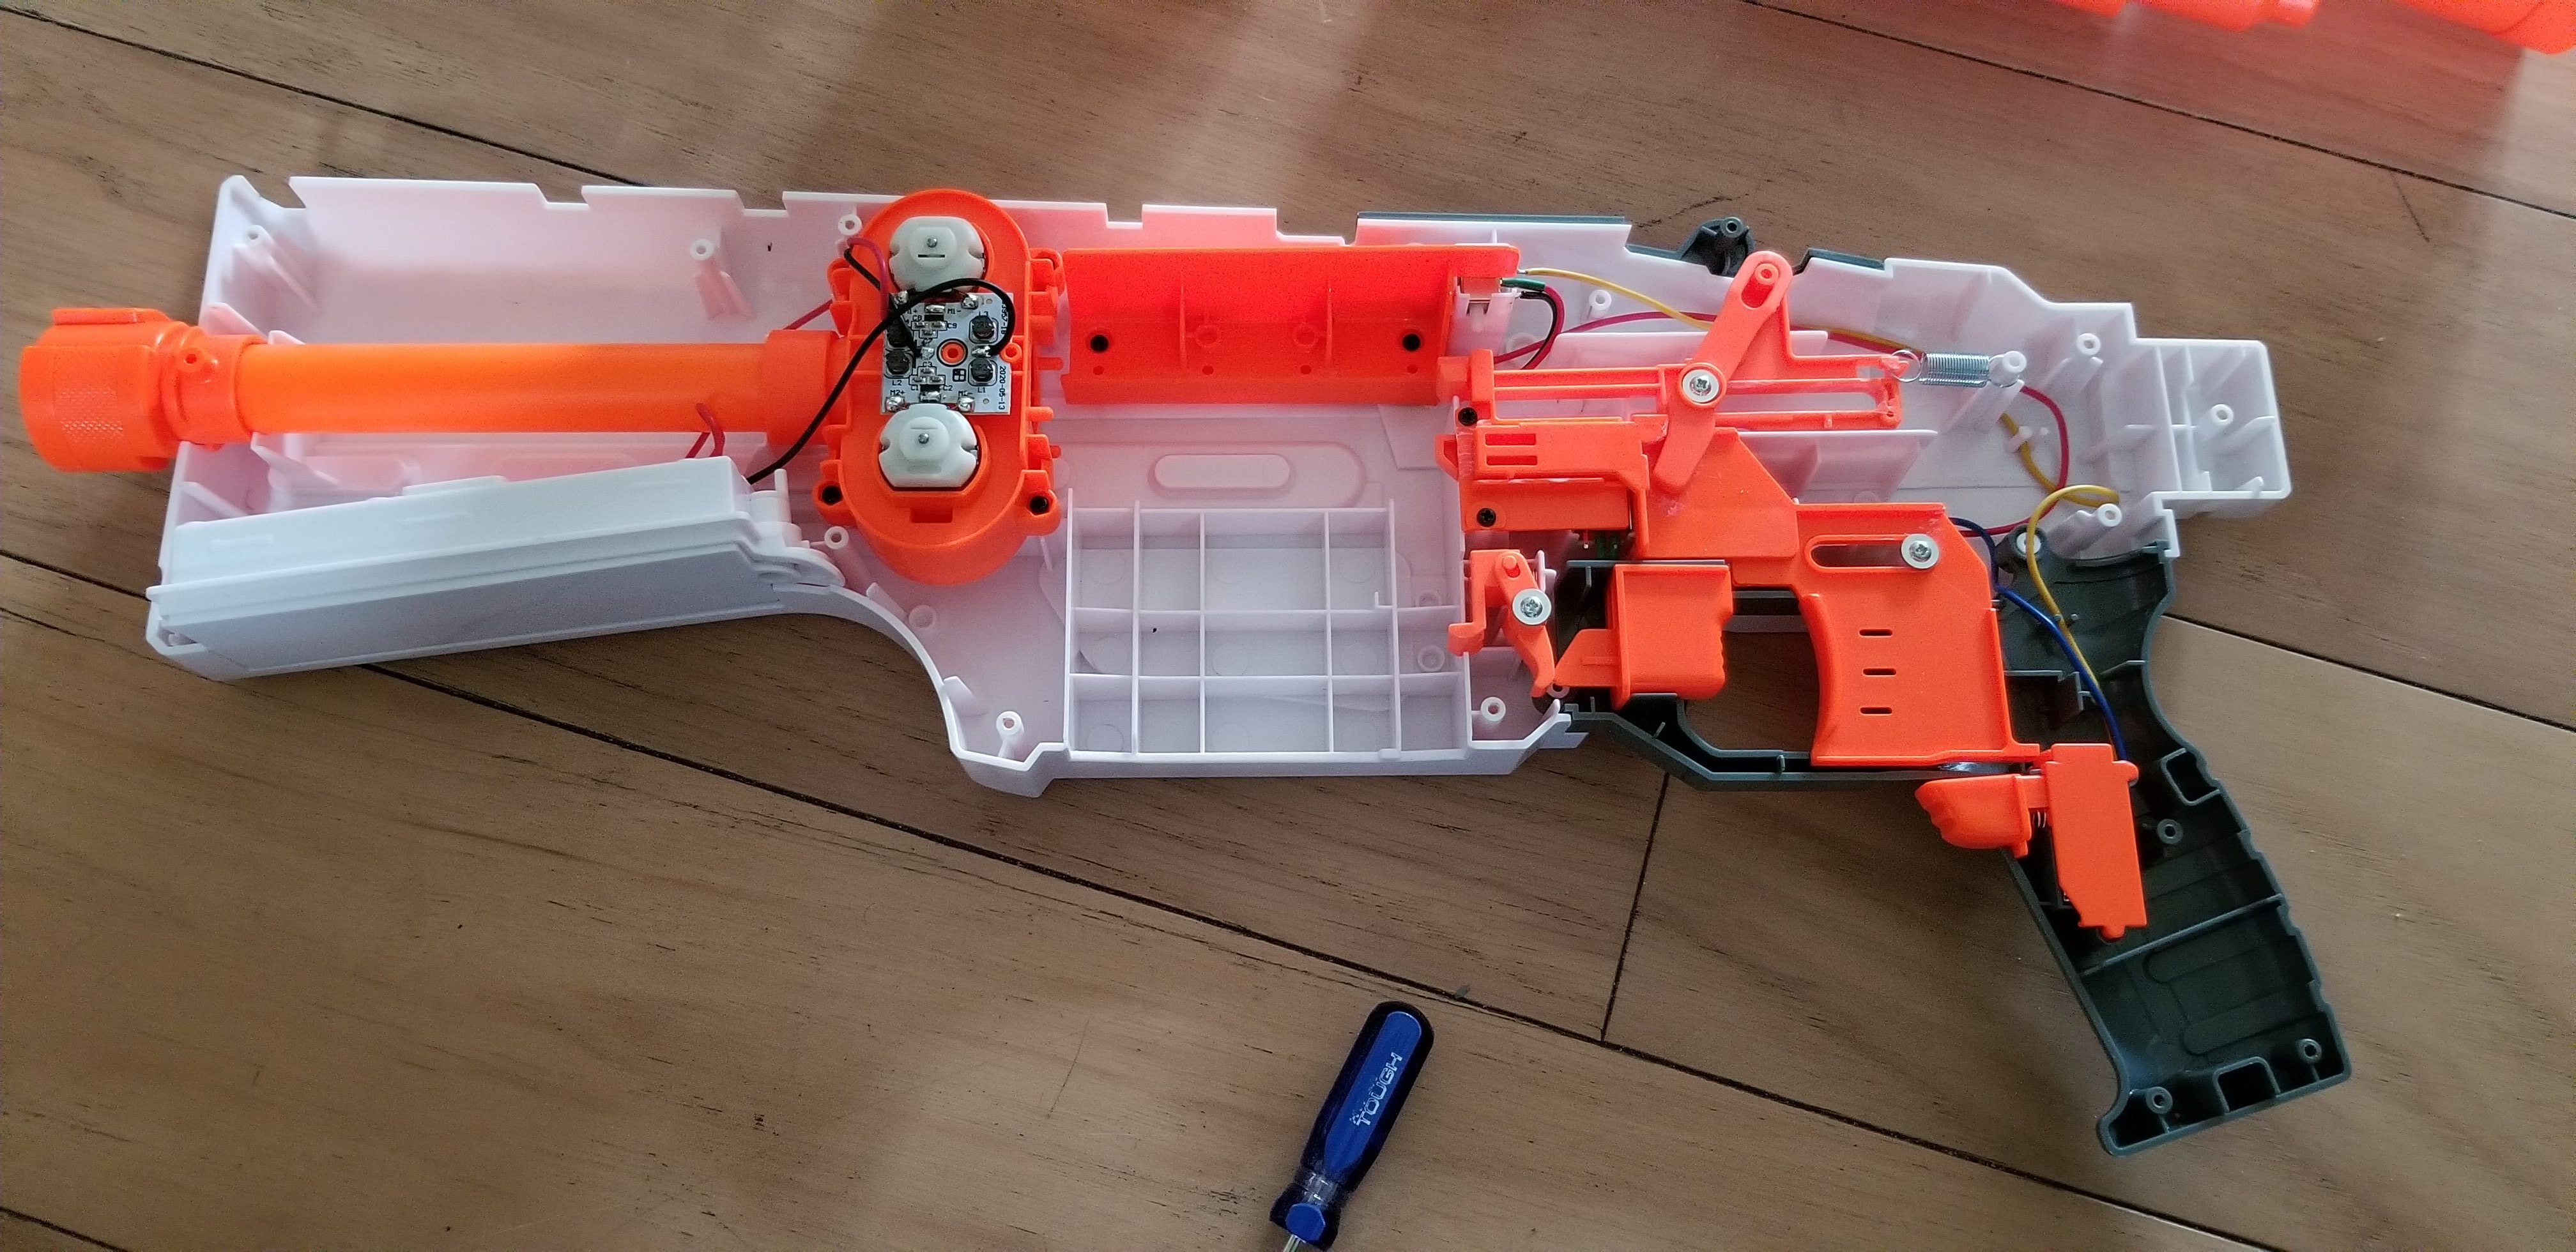 REVIEW] Nerf Fortnite IR  Infantry Rifle 